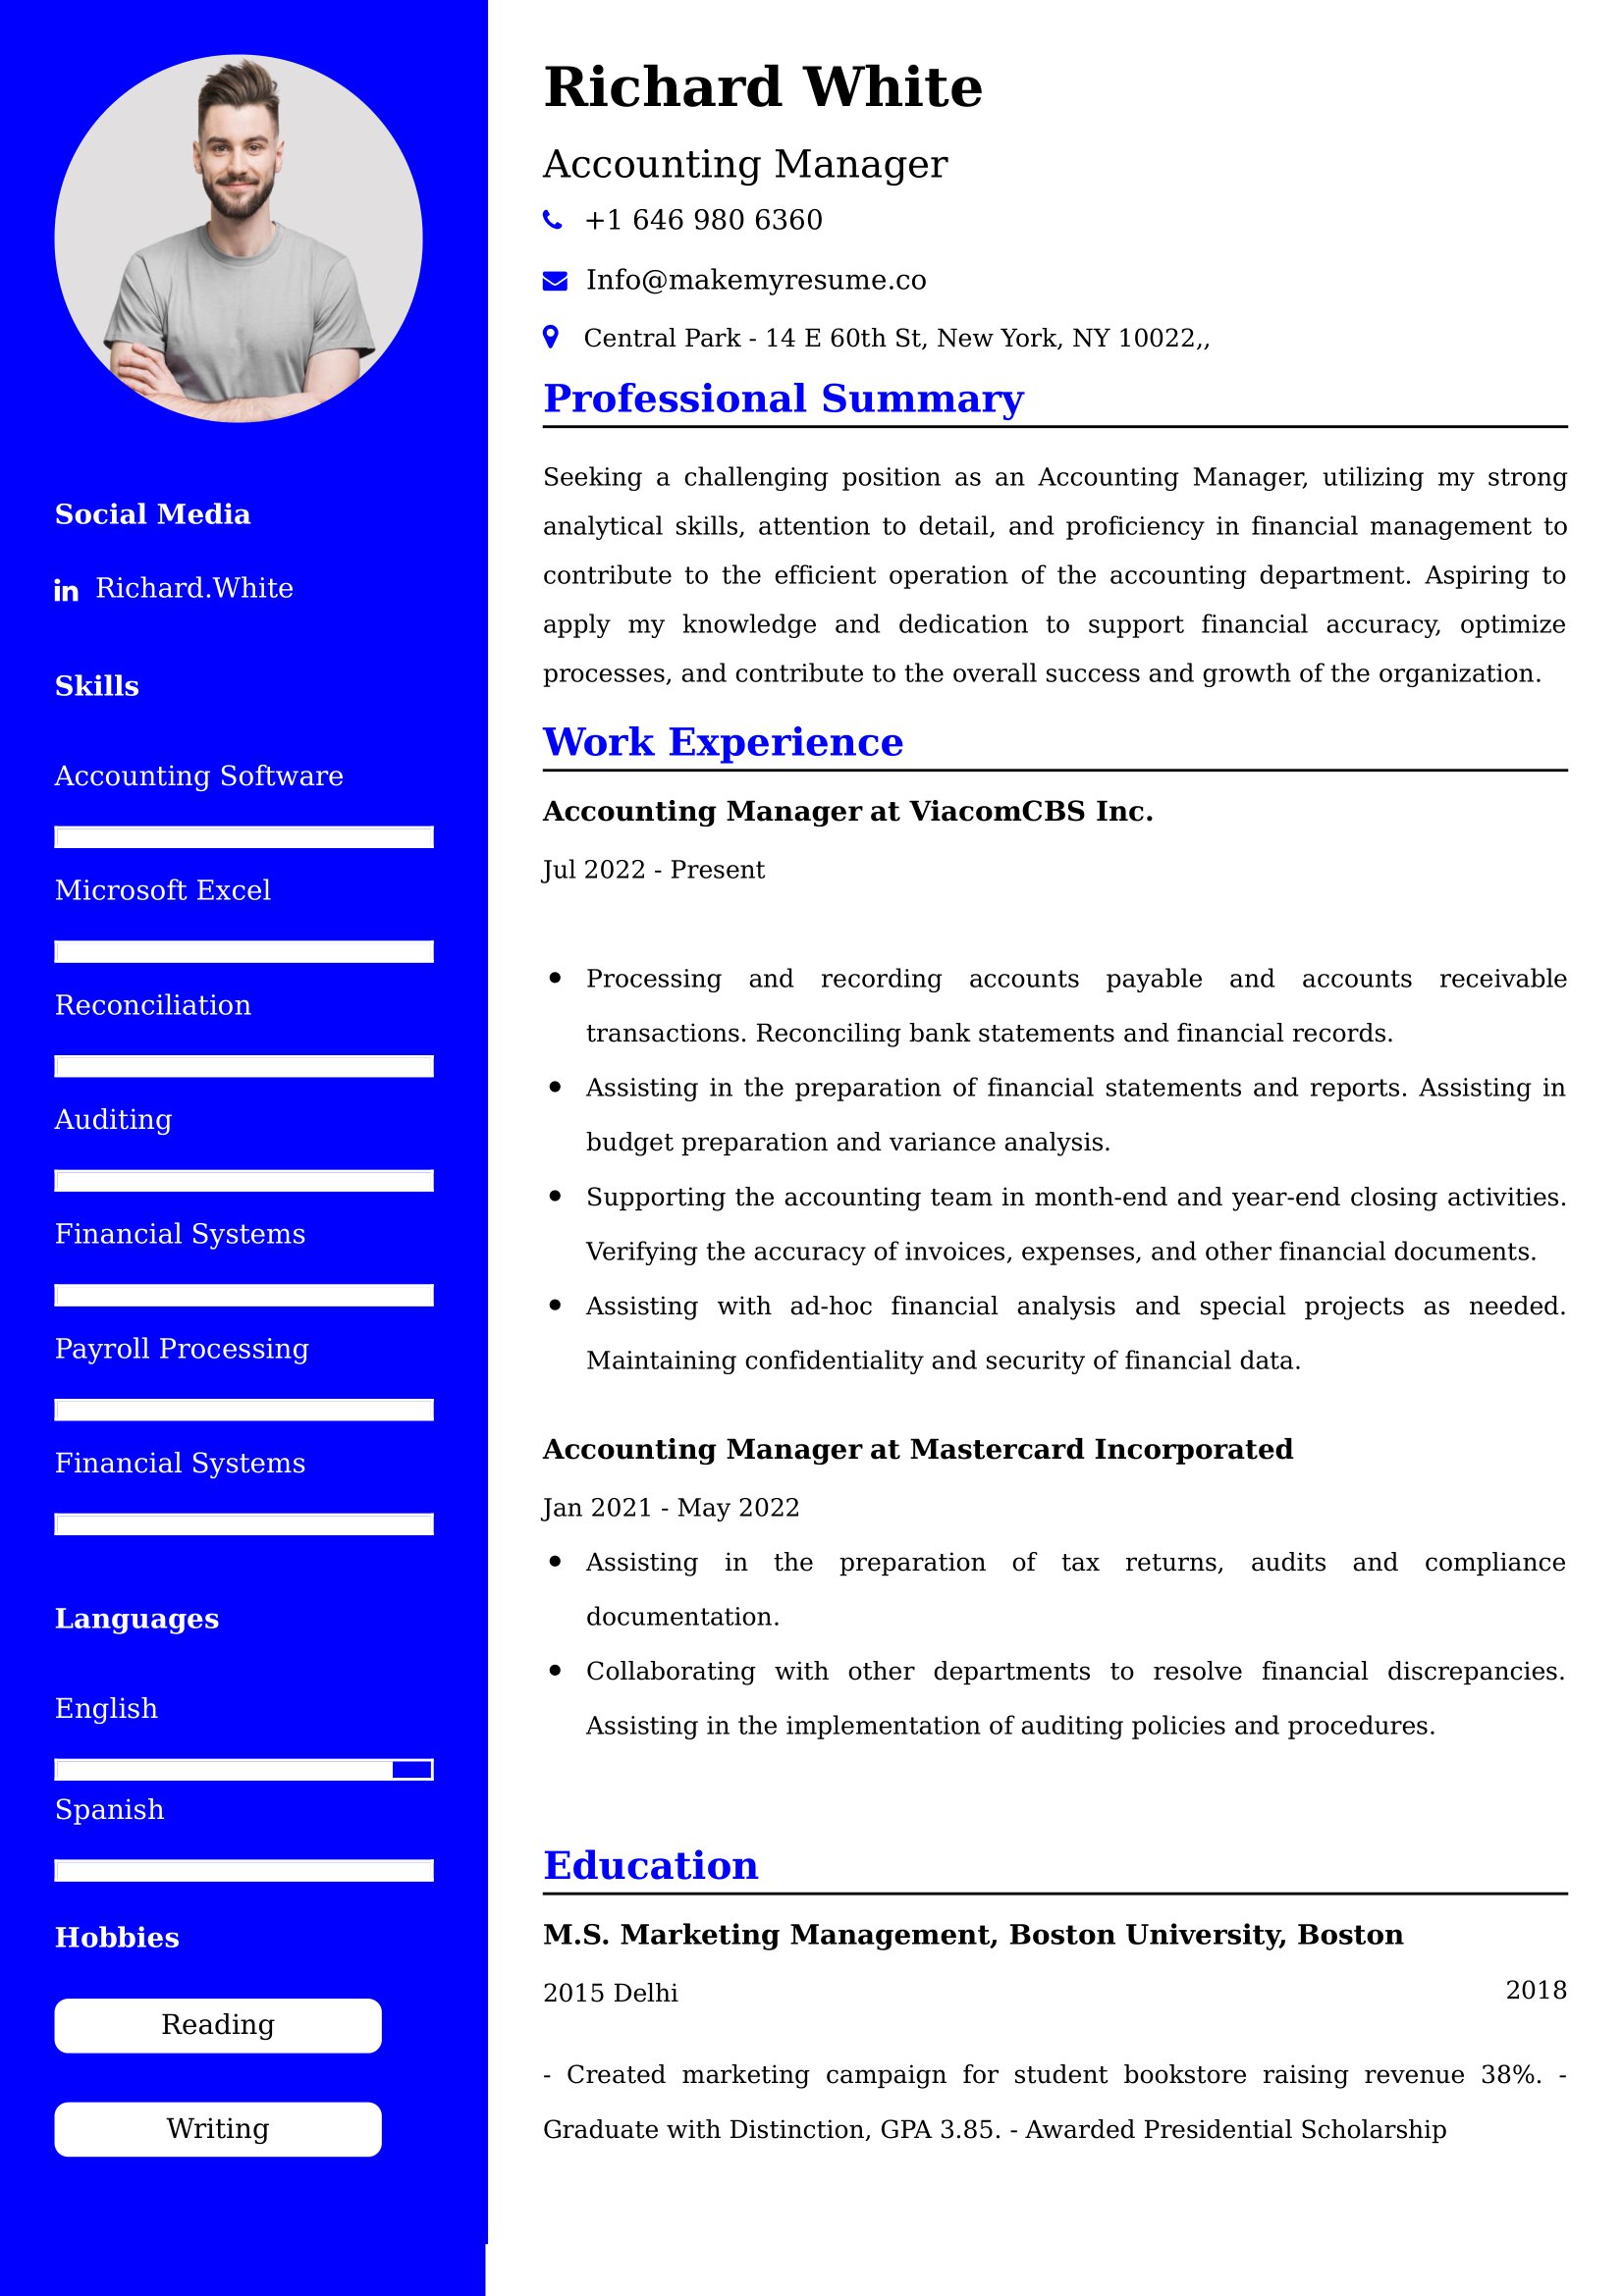 Accounting Manager Resume Examples for UAE